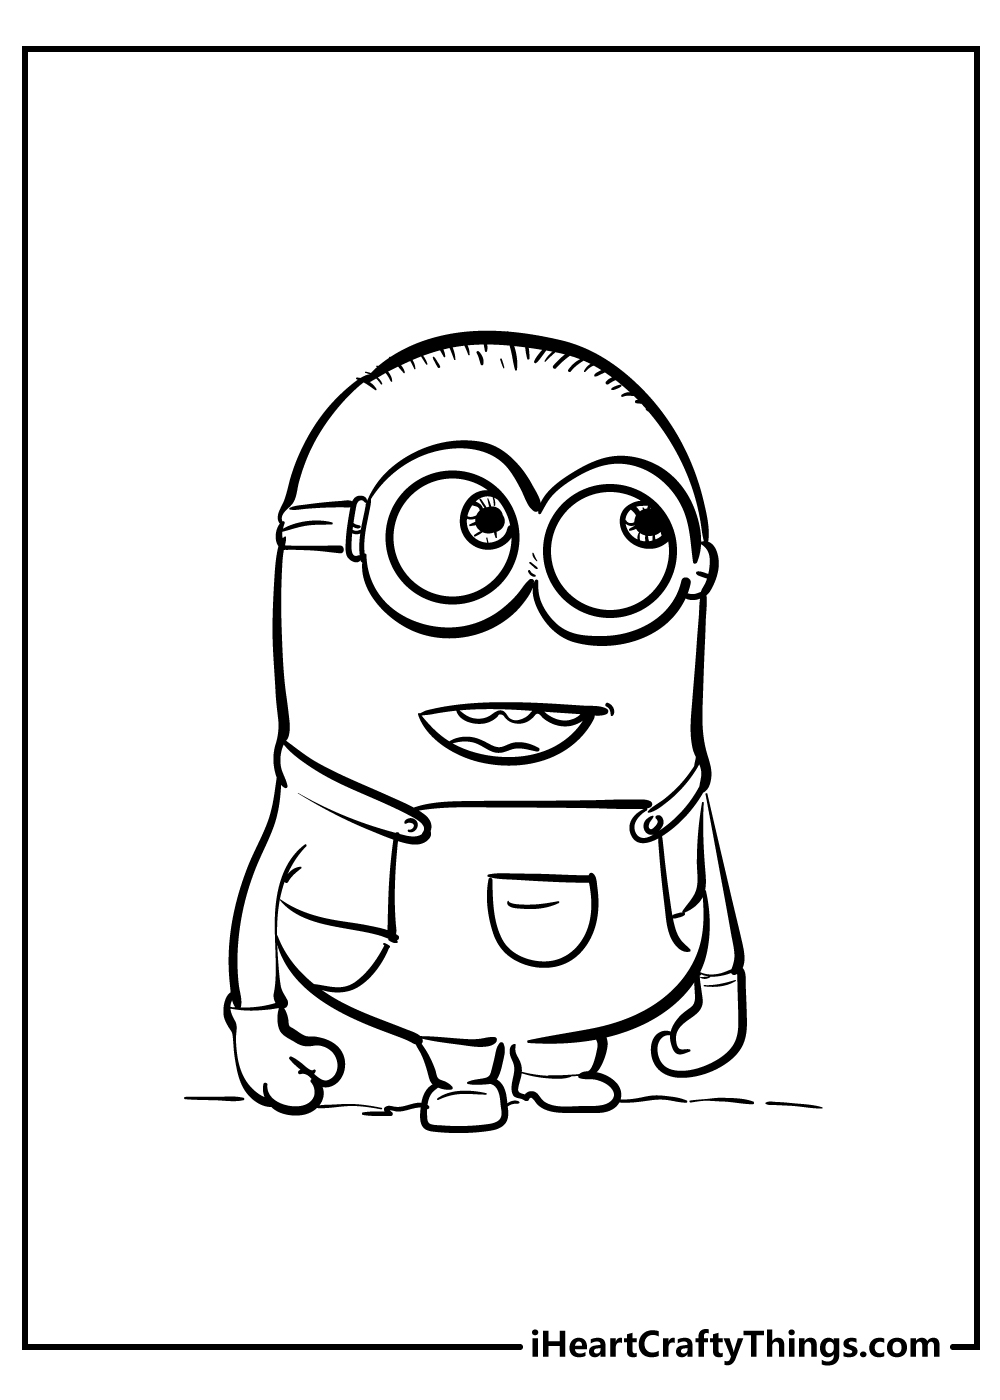 Minions Coloring Pages for preschoolers free printable